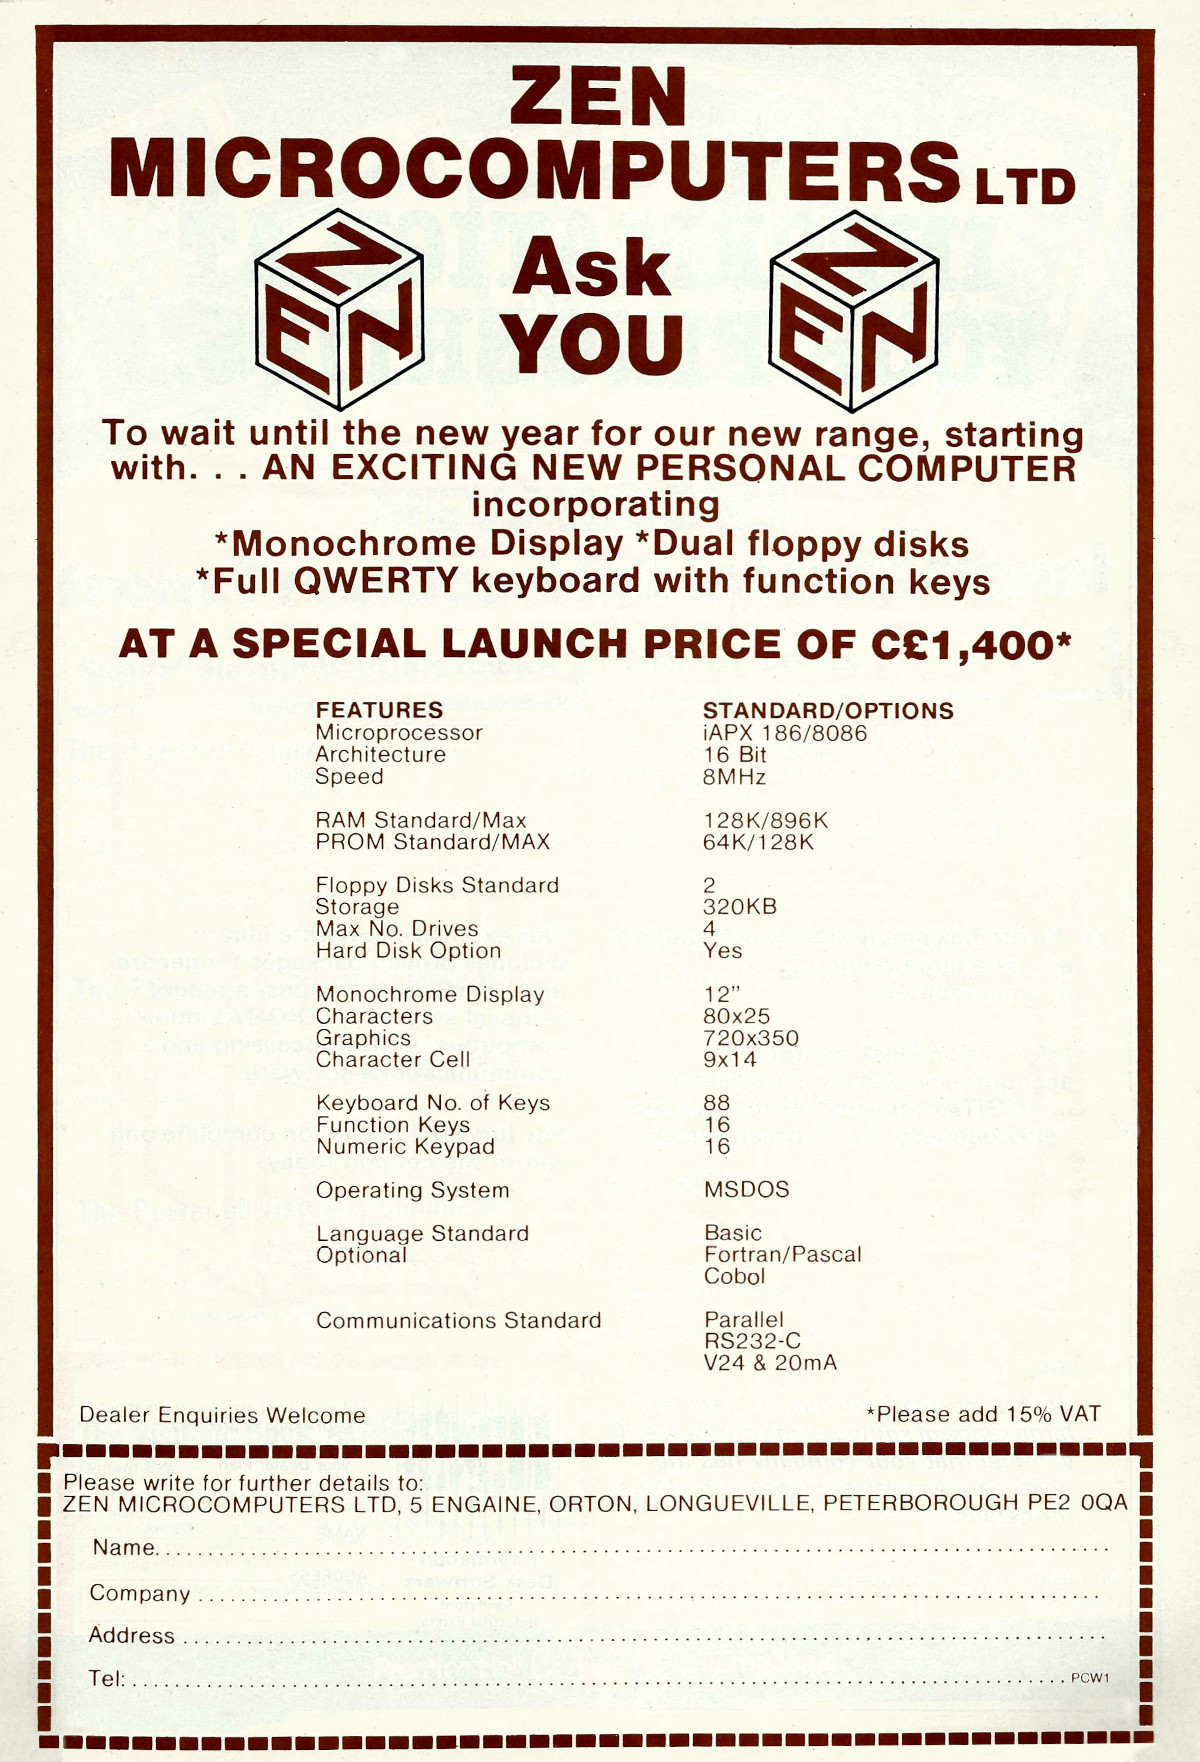 A pre-released advert for Zen Microcomputer's mystery IBM-compatible PC, possibly also called Zen, either after a branch of Chinese Bhuddism or the ship's computer in legendary 1970s TV series Blake's 7. It shows the possibly-garbled iAPX 186/8086 microprocessor designation in the otherwise-standard specification. From Personal Computer World, December 1982